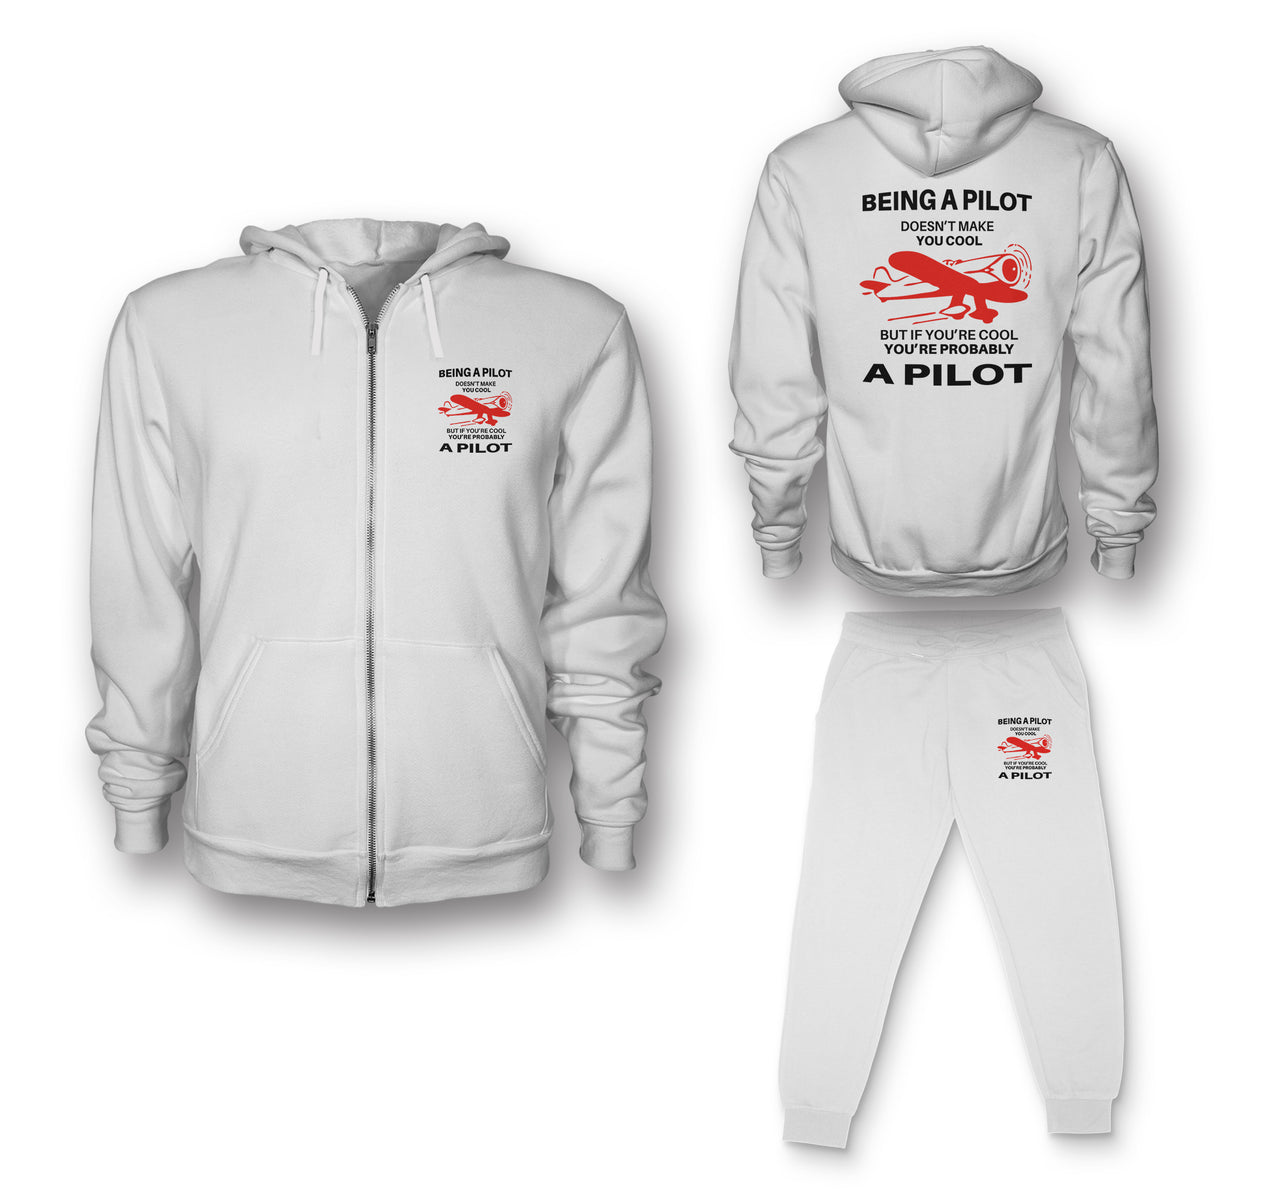 If You're Cool You're Probably a Pilot Designed Zipped Hoodies & Sweatpants Set